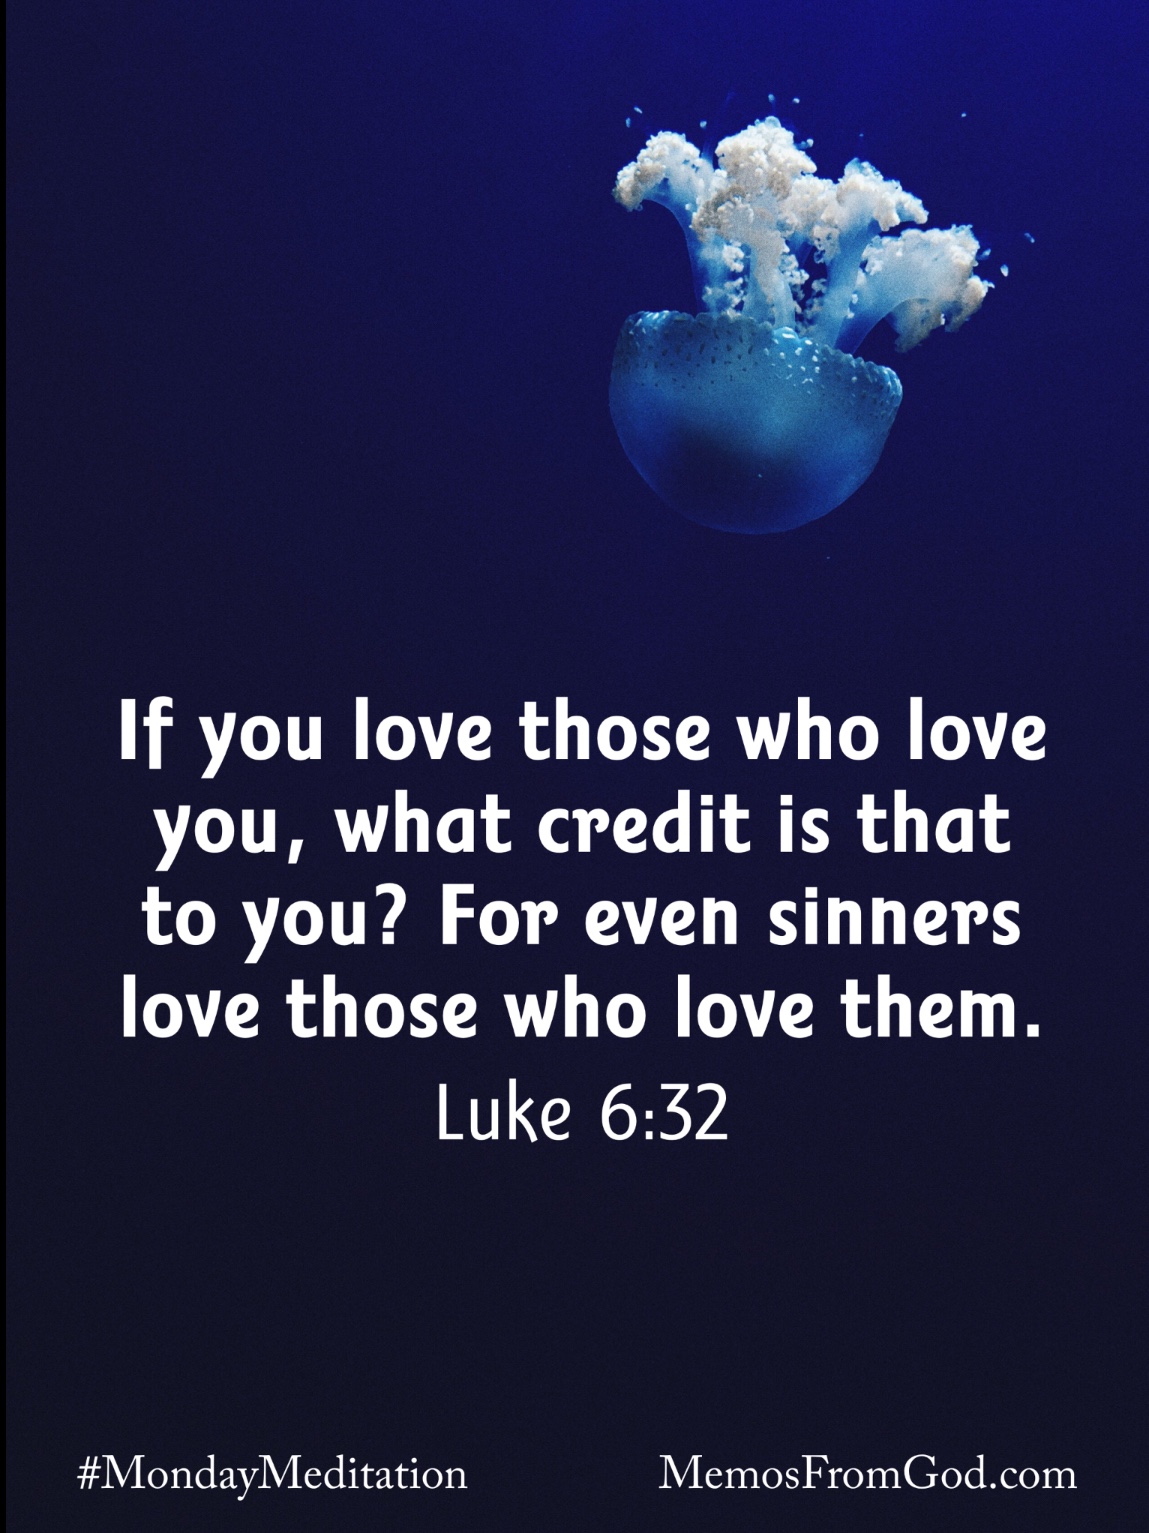 A blue jellyfish with white tentacles on a deep blue background. Caption: If you love those who love you, what credit is that to you? For even sinners love those who love them. Luke 6:32